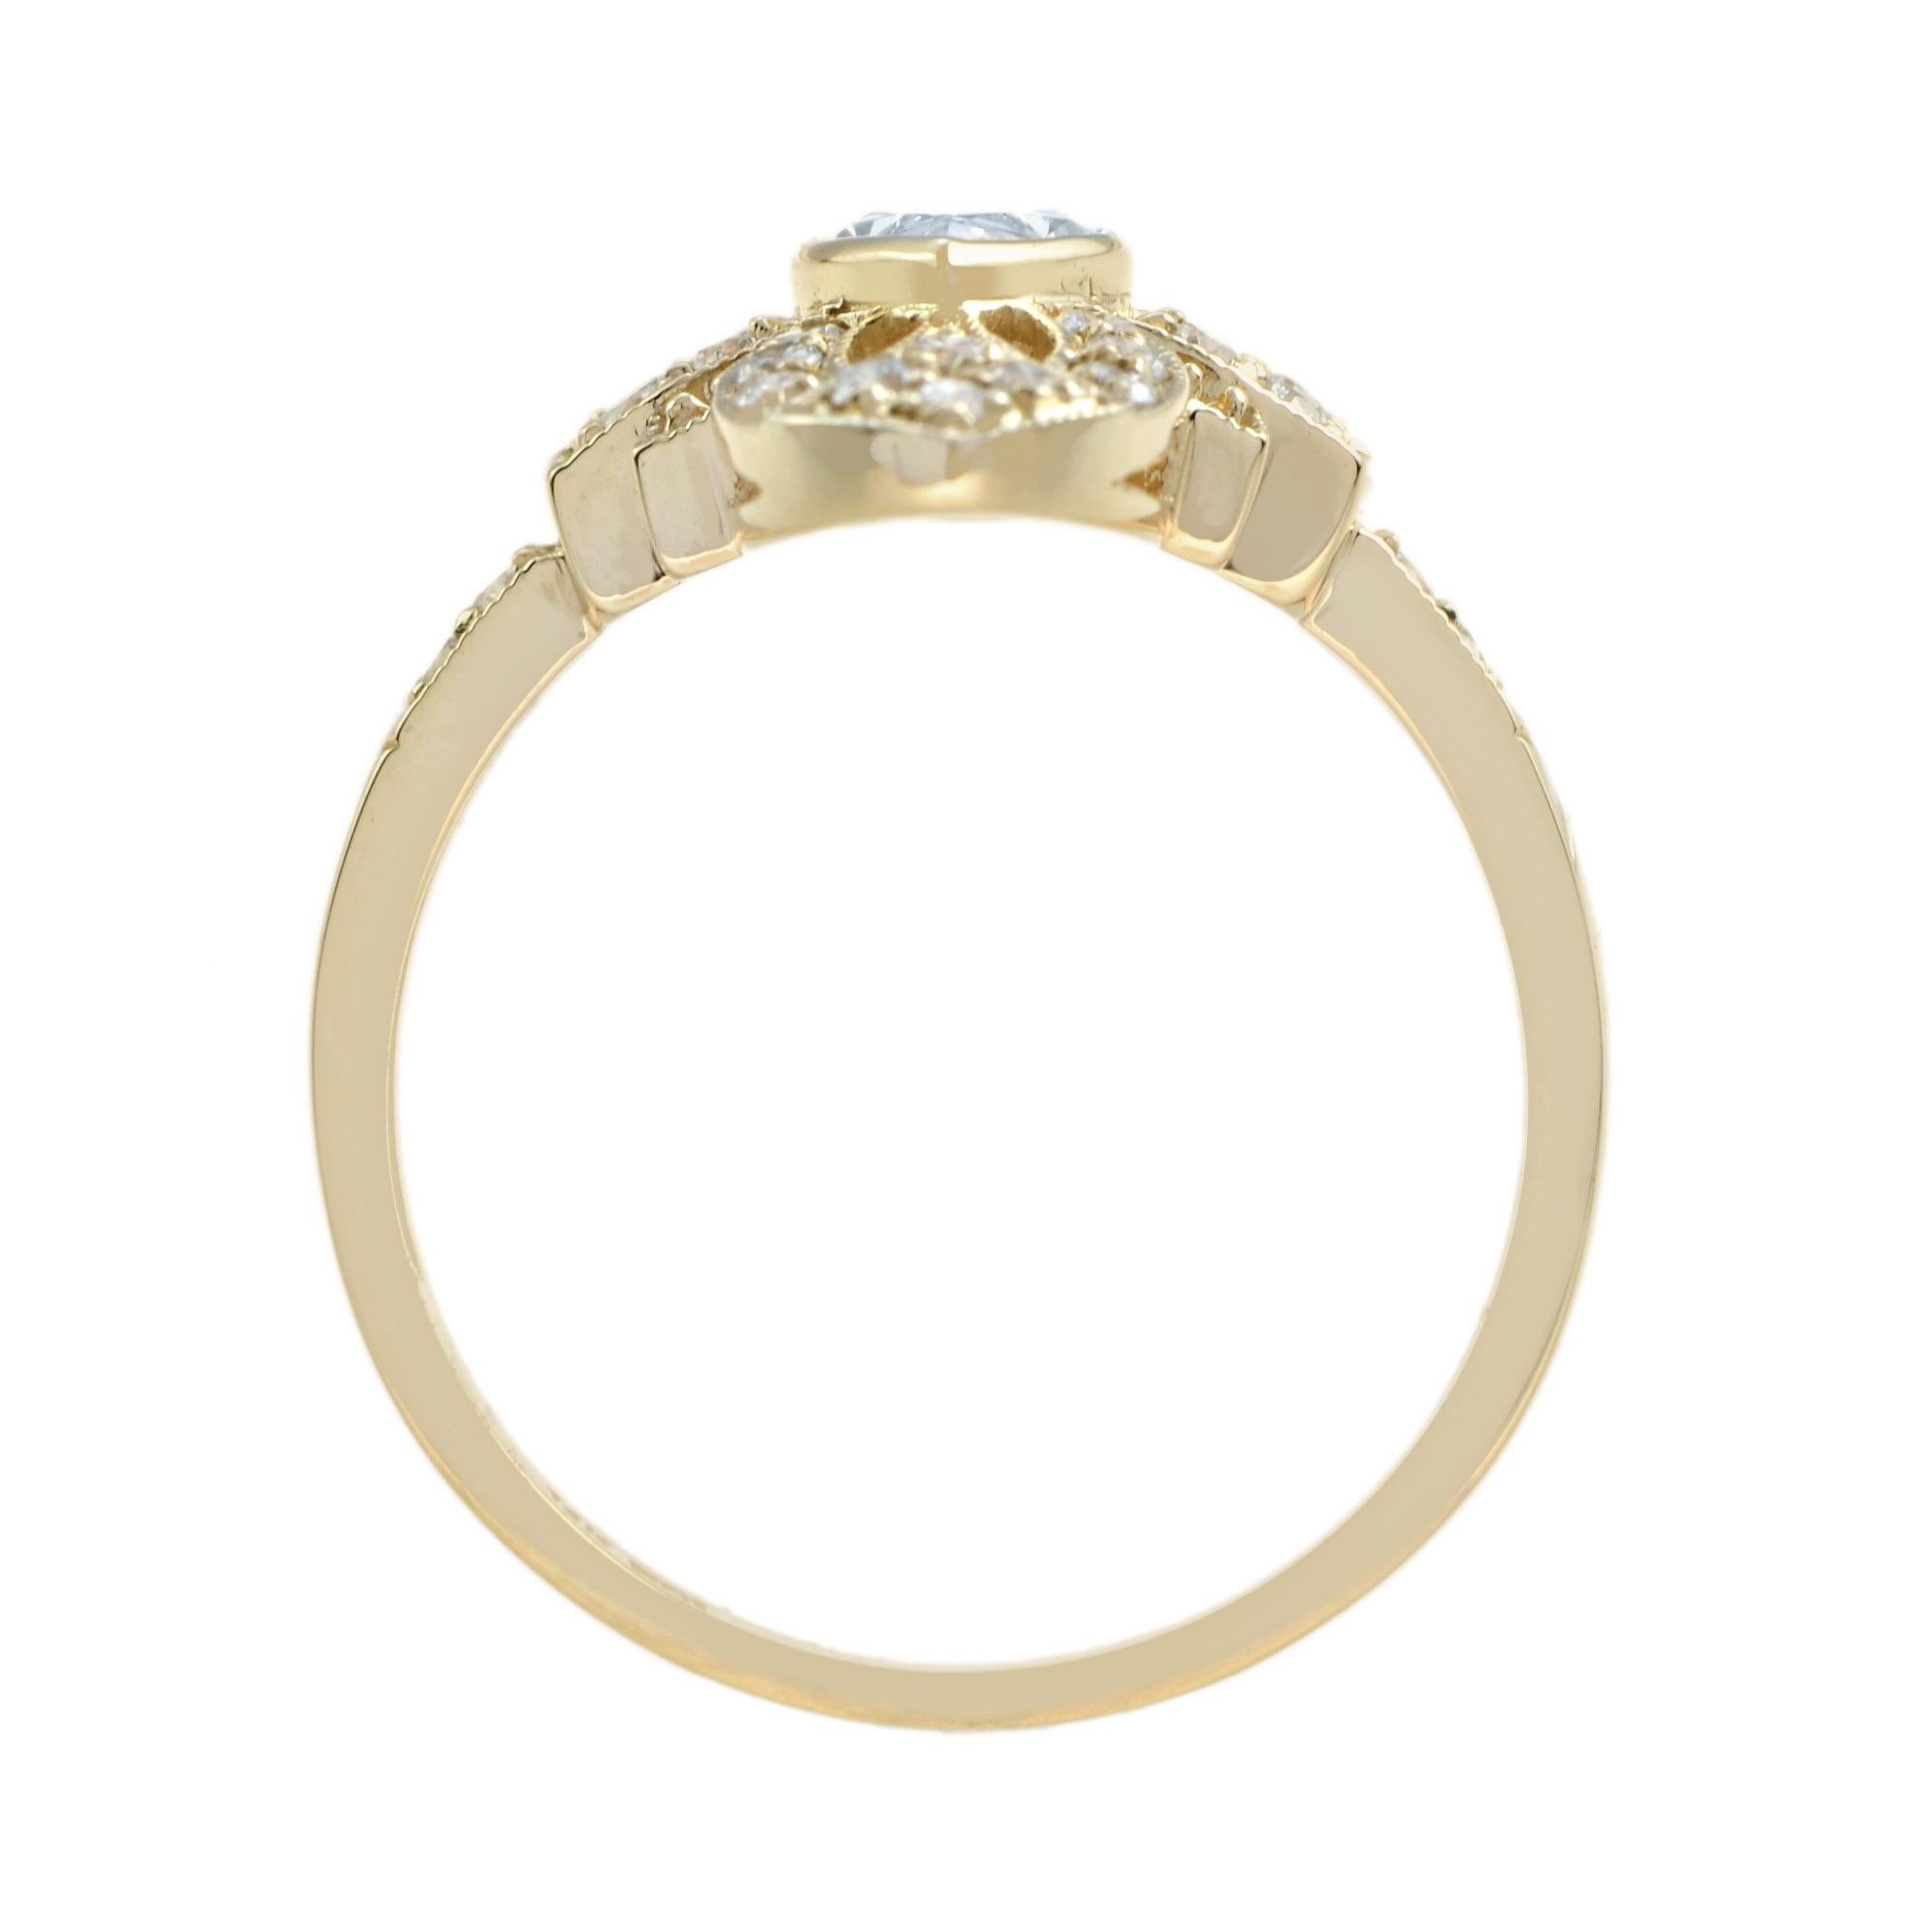 For Sale:  Aquamarine and Diamond Art Deco Style Marquise Shape Ring in 18K Yellow Gold 6